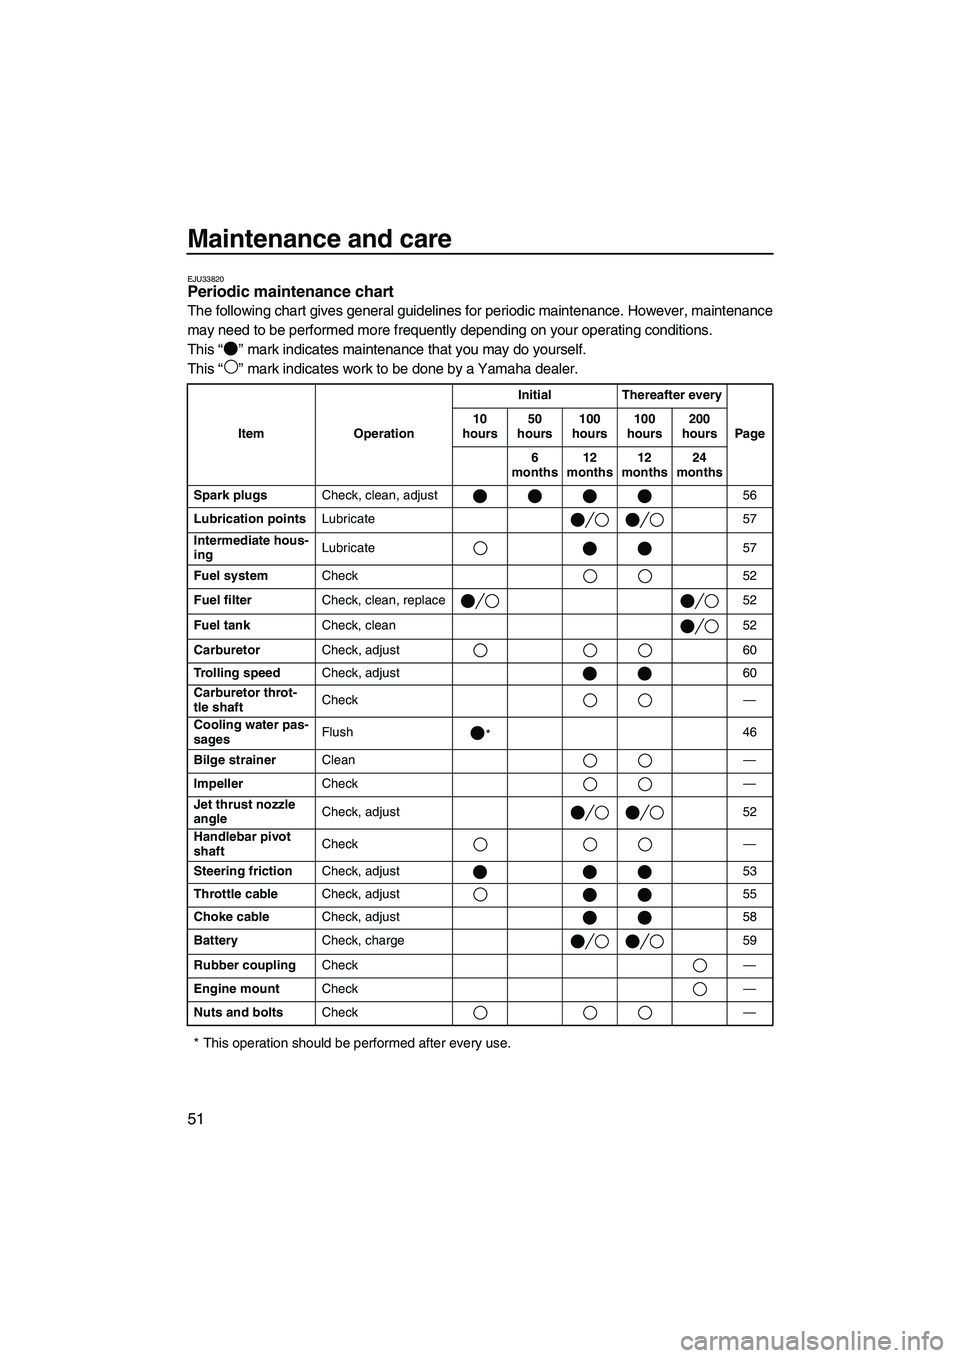 YAMAHA SUPERJET 2007  Owners Manual Maintenance and care
51
EJU33820Periodic maintenance chart 
The following chart gives general guidelines for periodic maintenance. However, maintenance
may need to be performed more frequently dependi